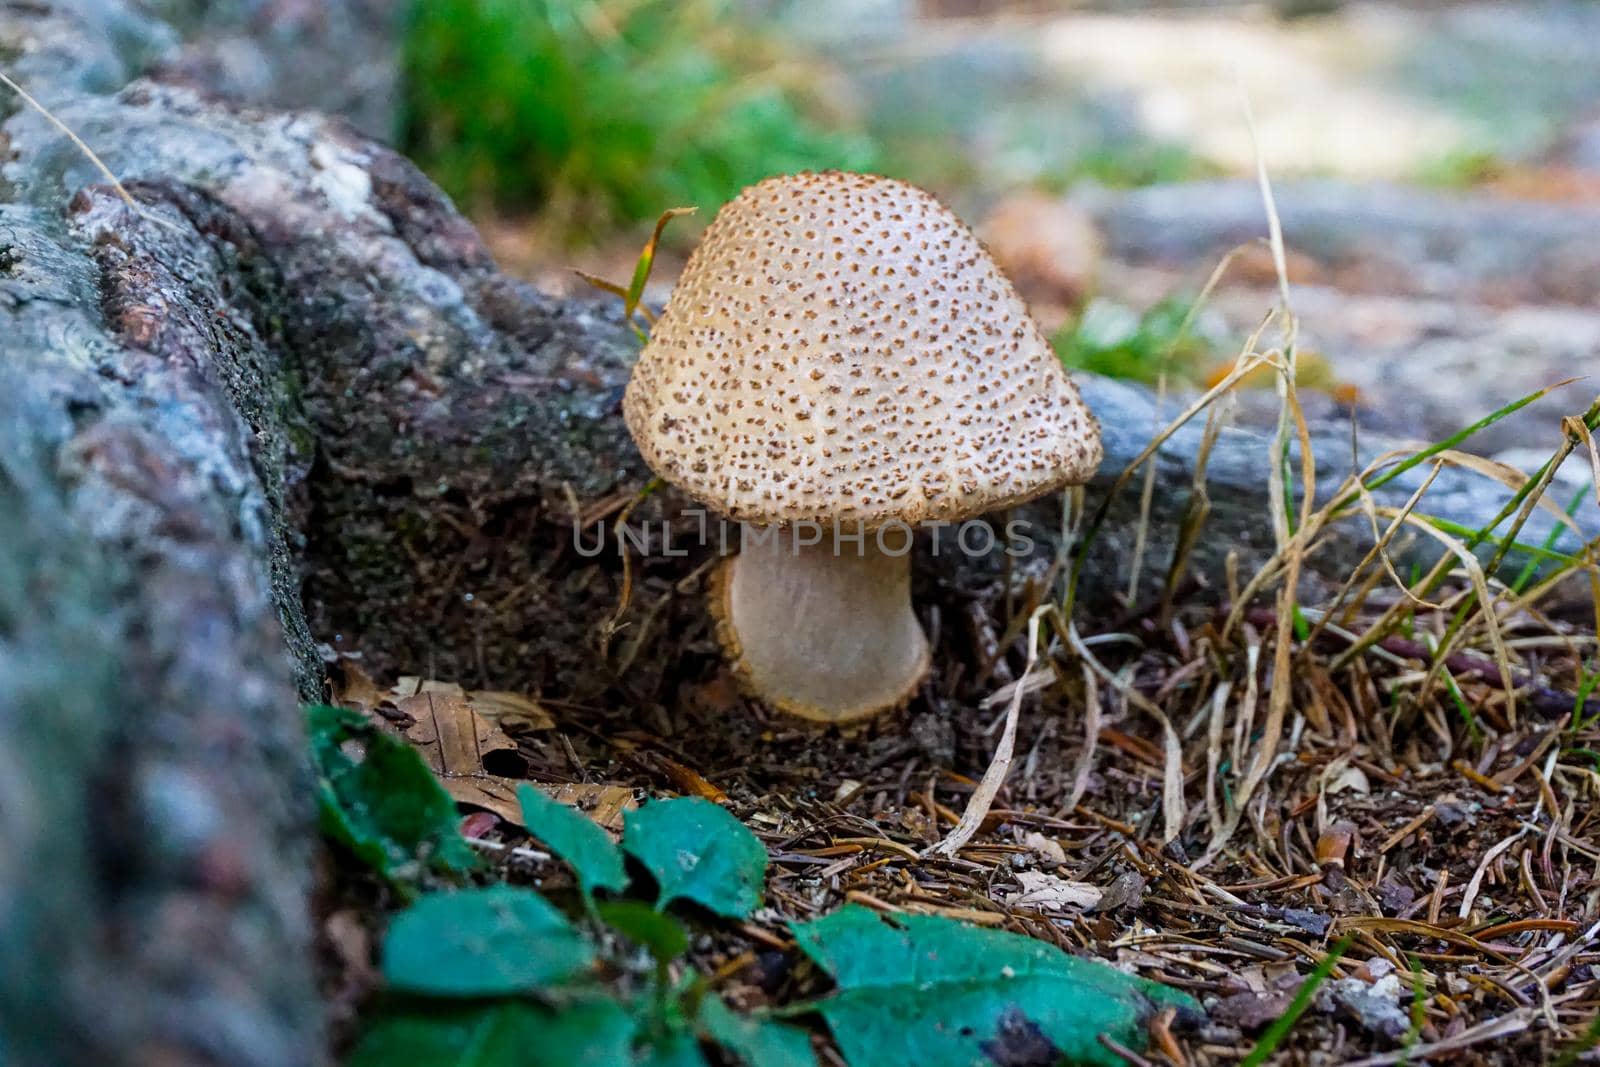 Close-up of a Blusher mushroom in the forest